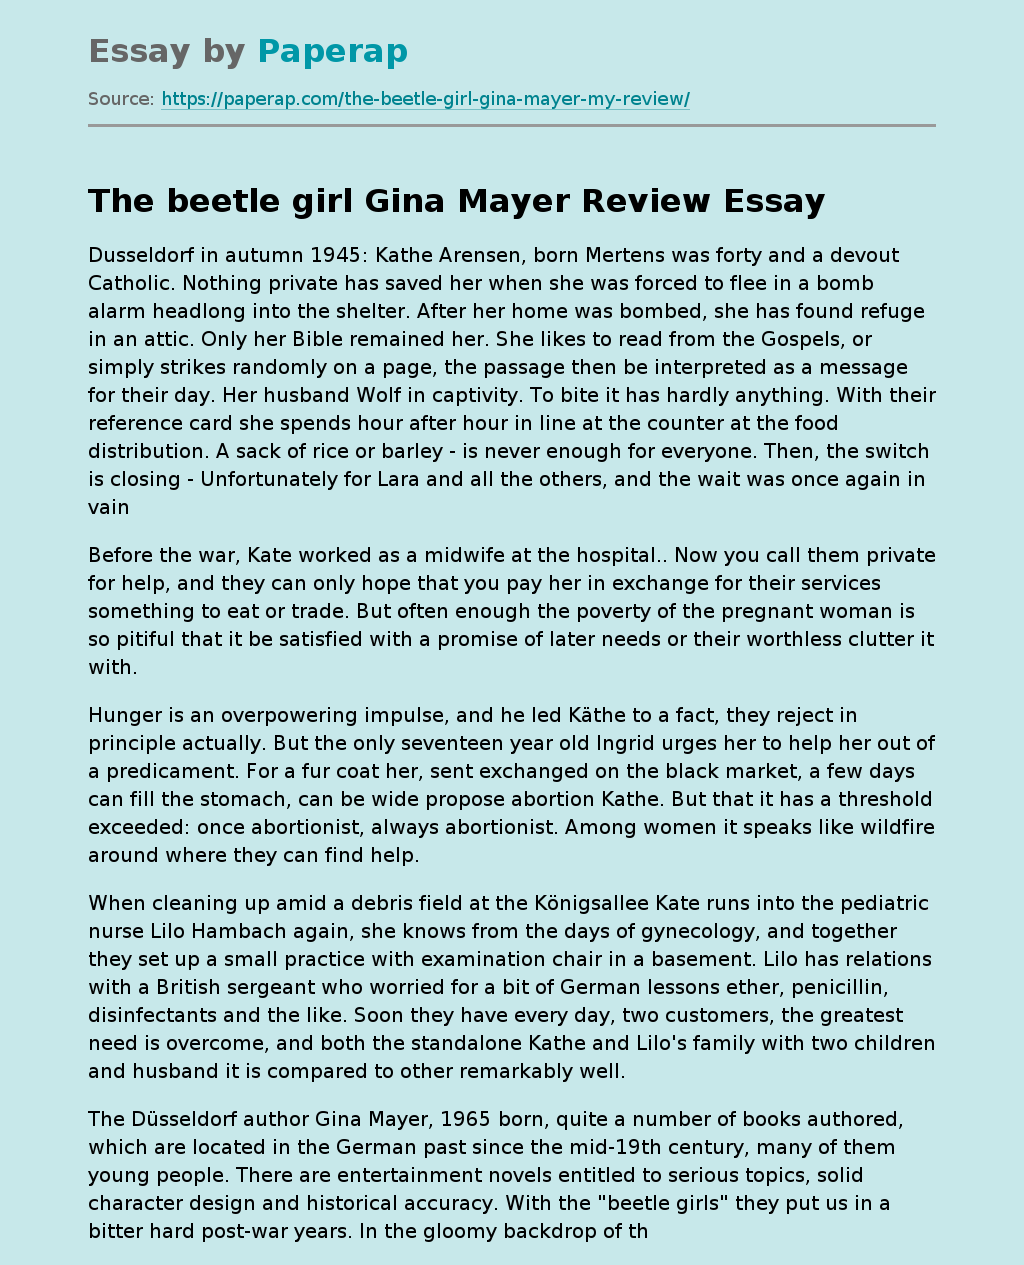 “The Beetle Girl” by Gina Mayer